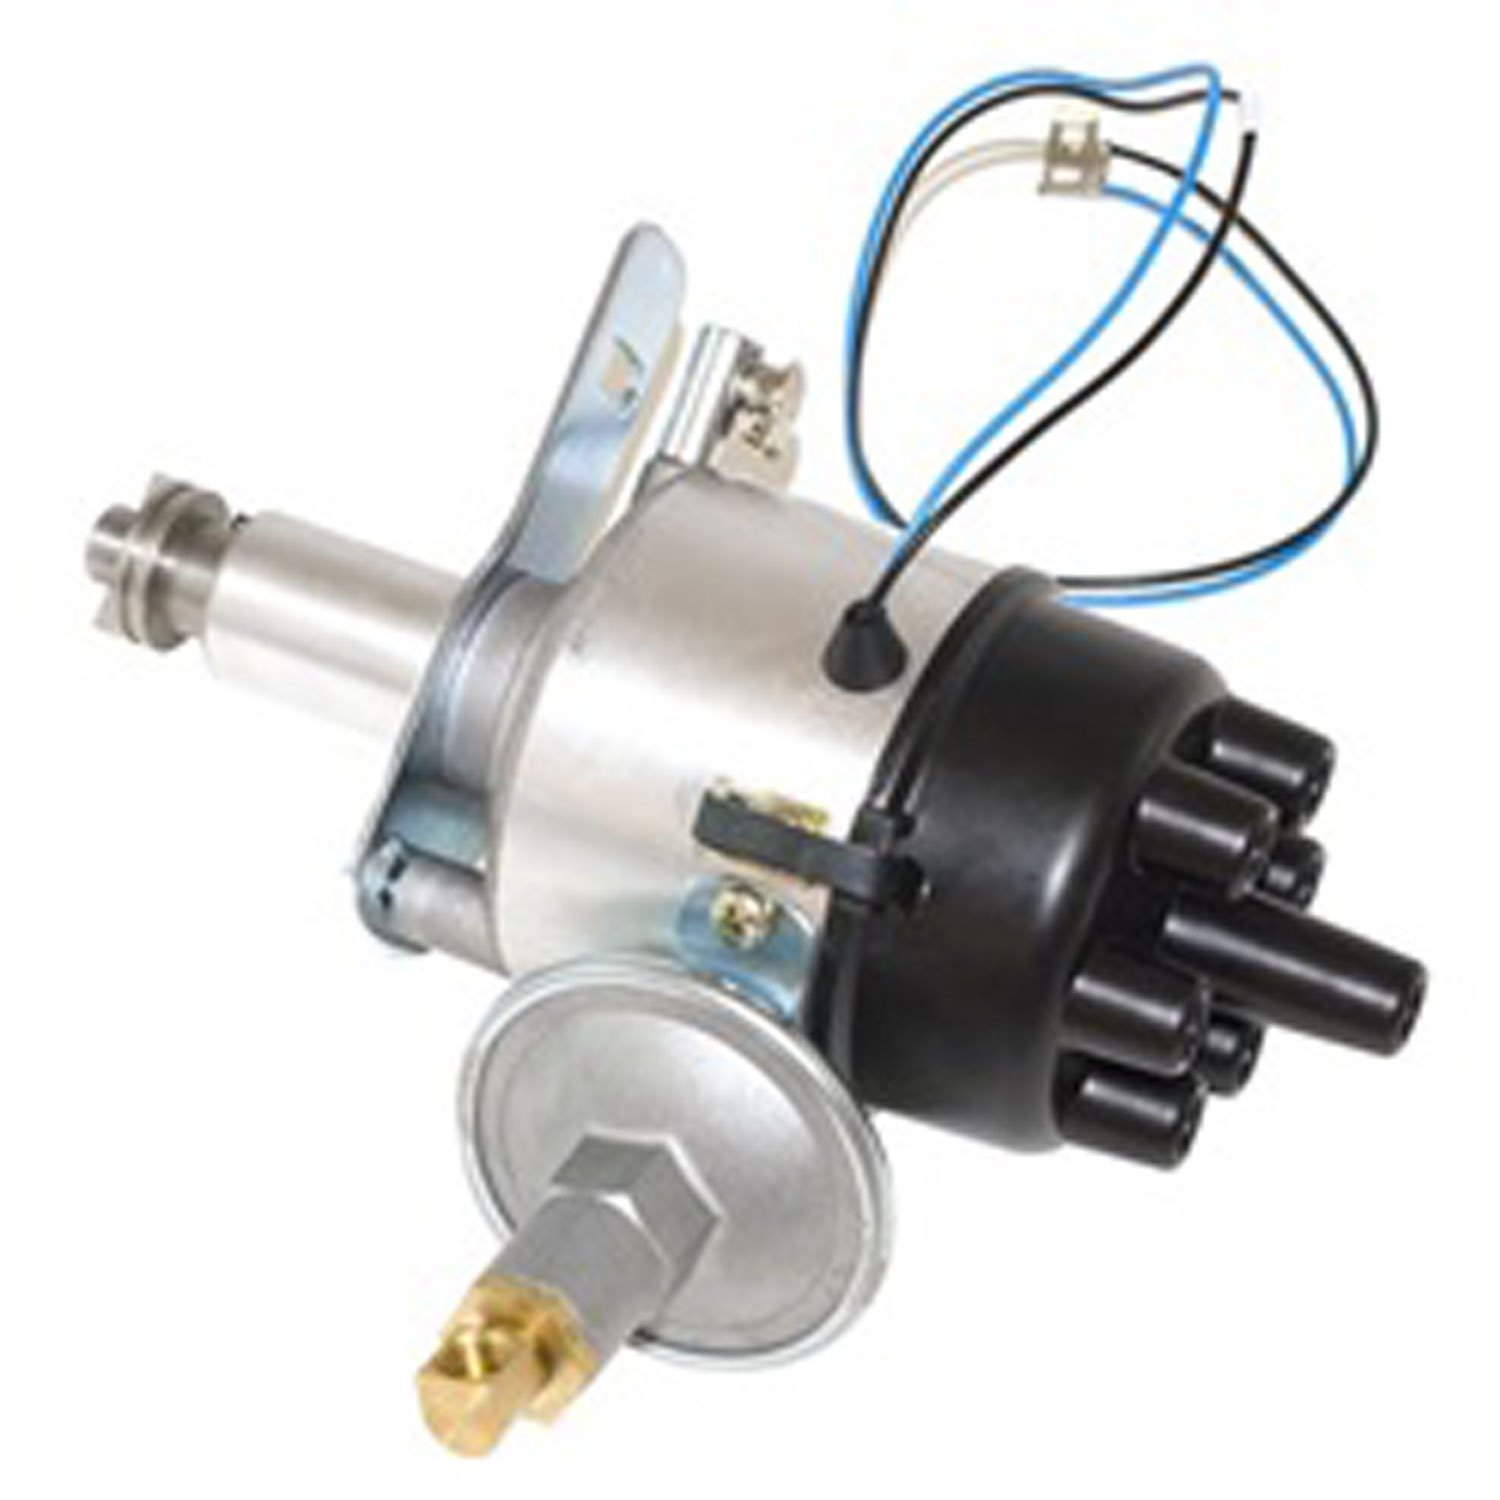 Electronic Distributor Upgrade for 1954-1964 Willys pickups and Station Wagon w/226 cu in. Super Hurricane 6-cylinder Engine